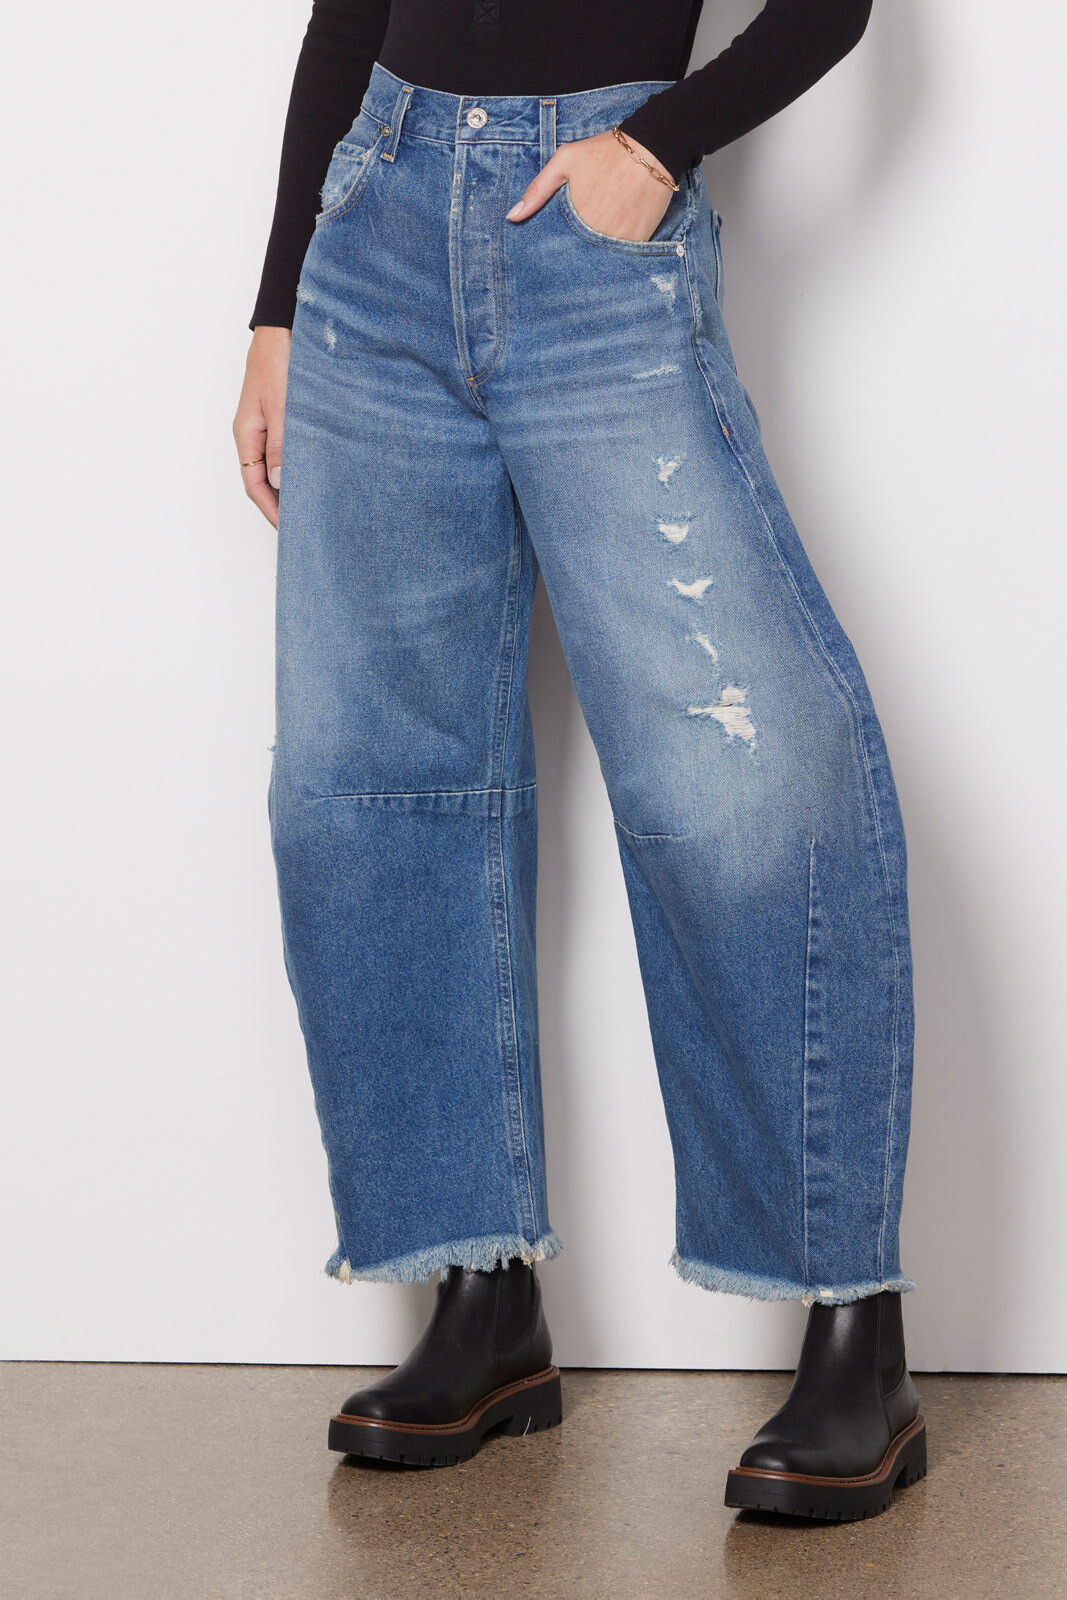 Citizens of Humanity Annina High-Rise Trouser Jeans | Anthropologie